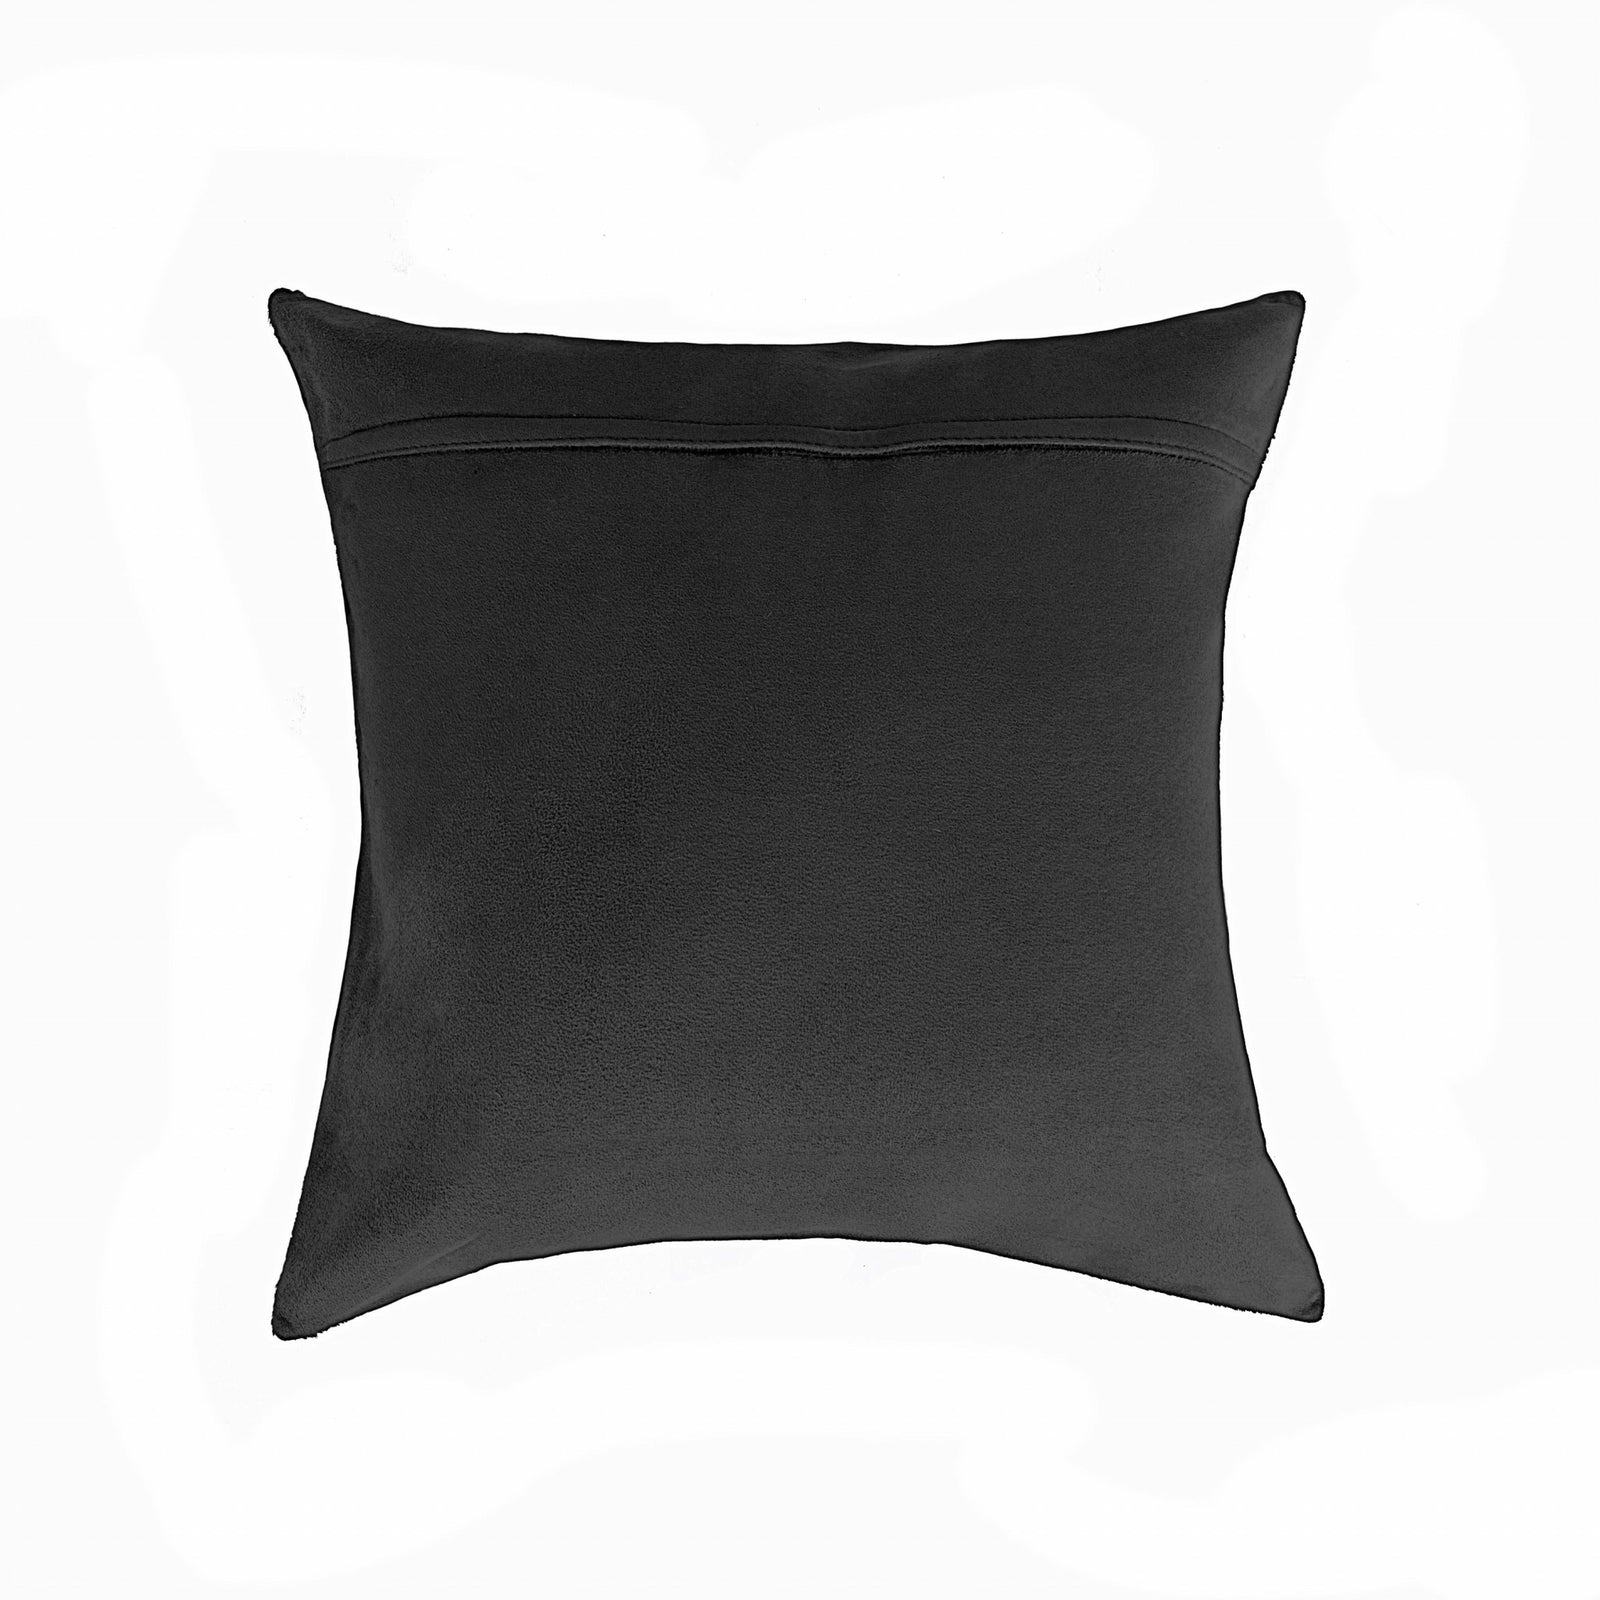 Black And White Cowhide Pillow - 18" x 18" x 5"